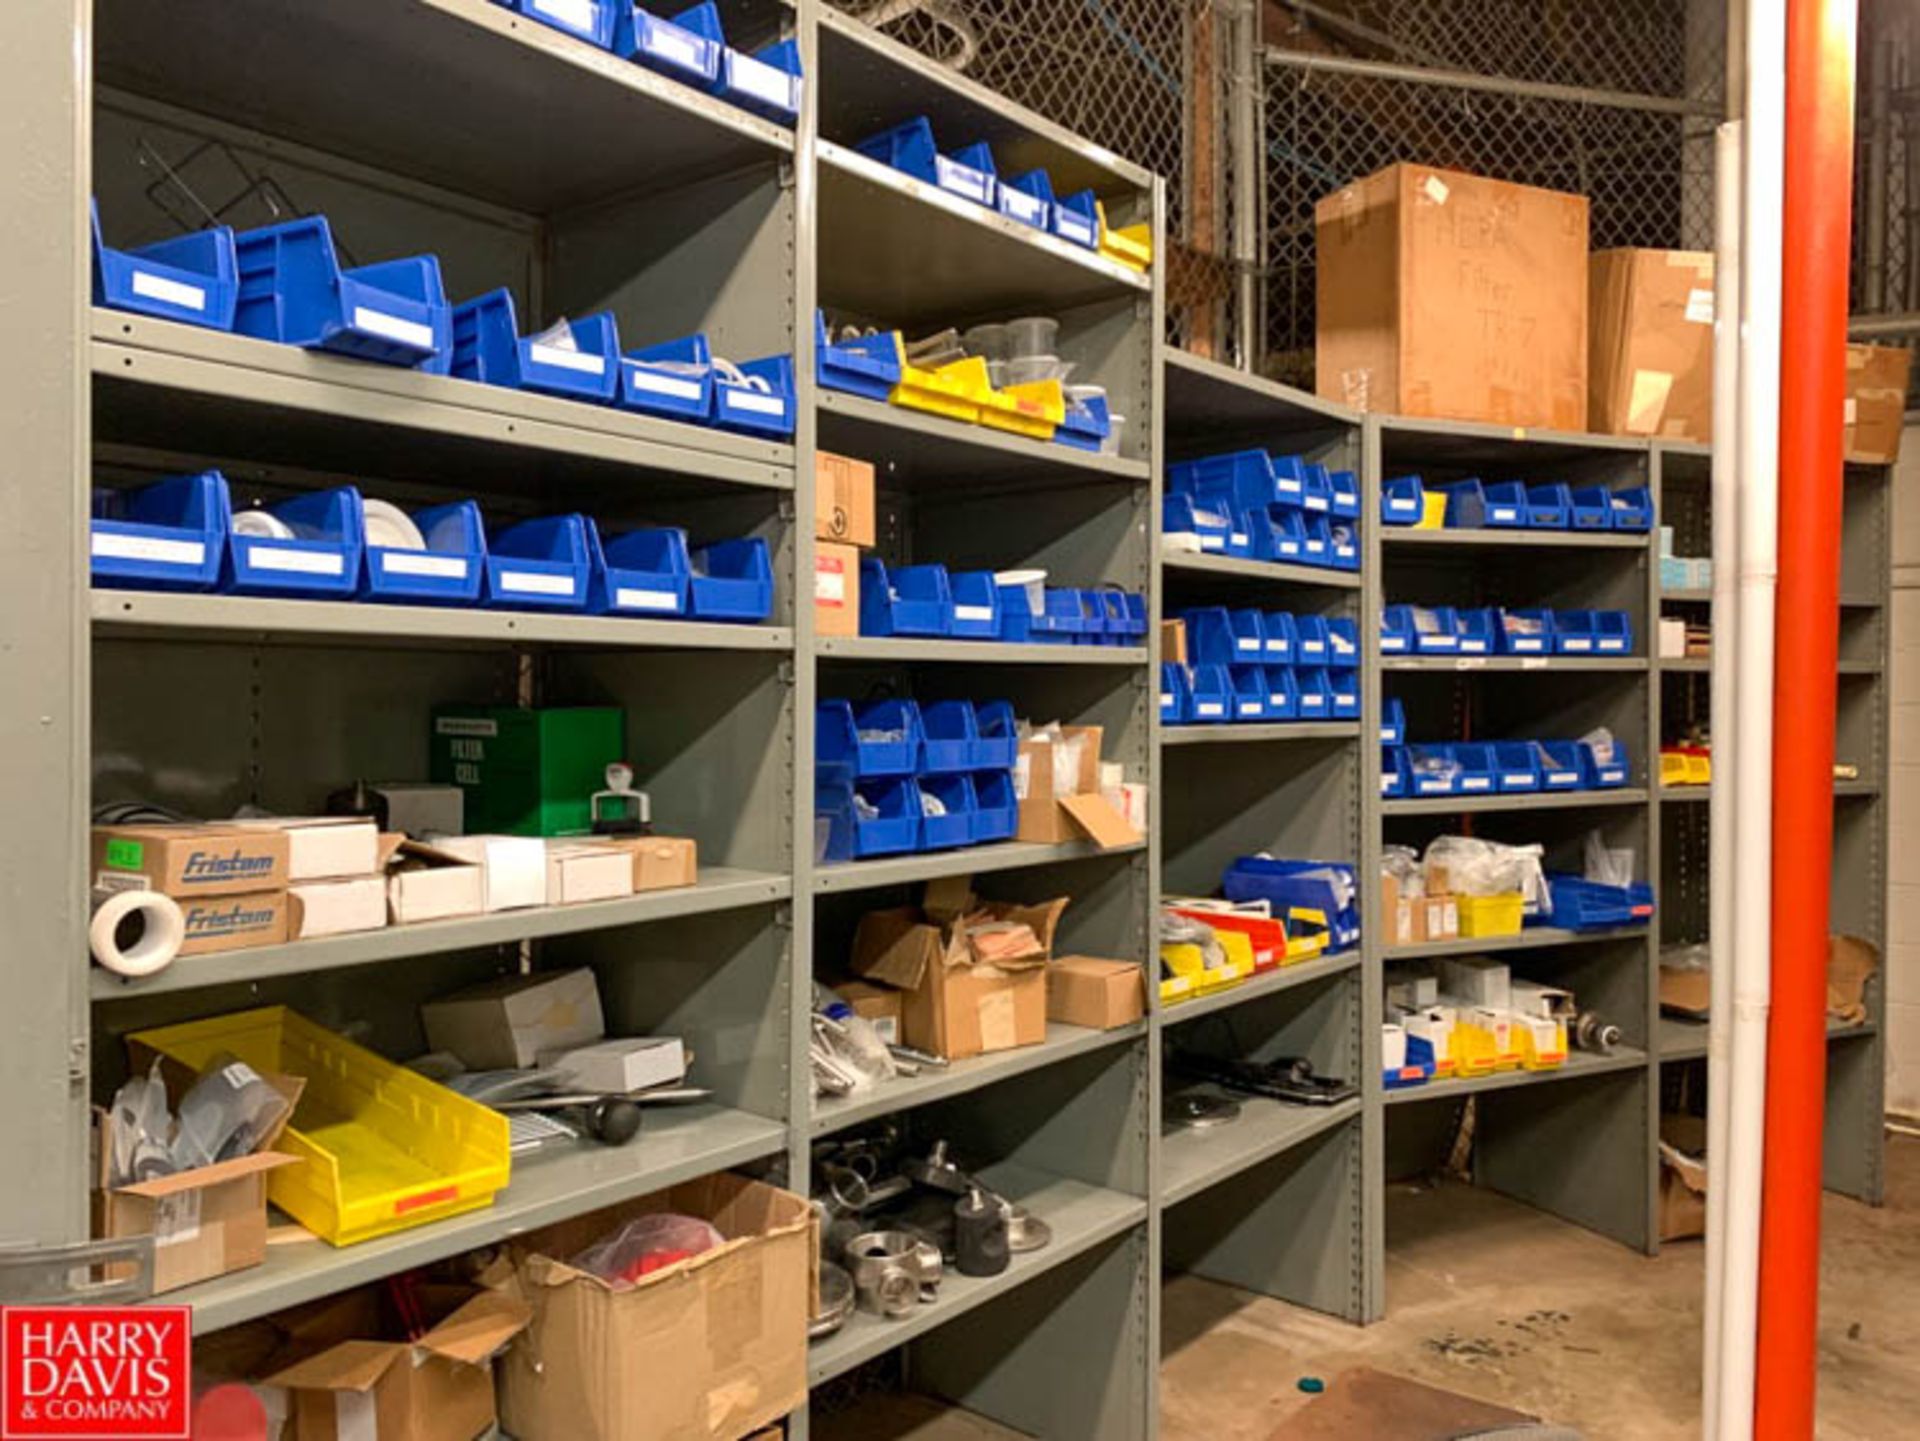 Assorted Plug Valves, Gaskets, Pump Parts and More; with Shelving Rigging Fee: $600